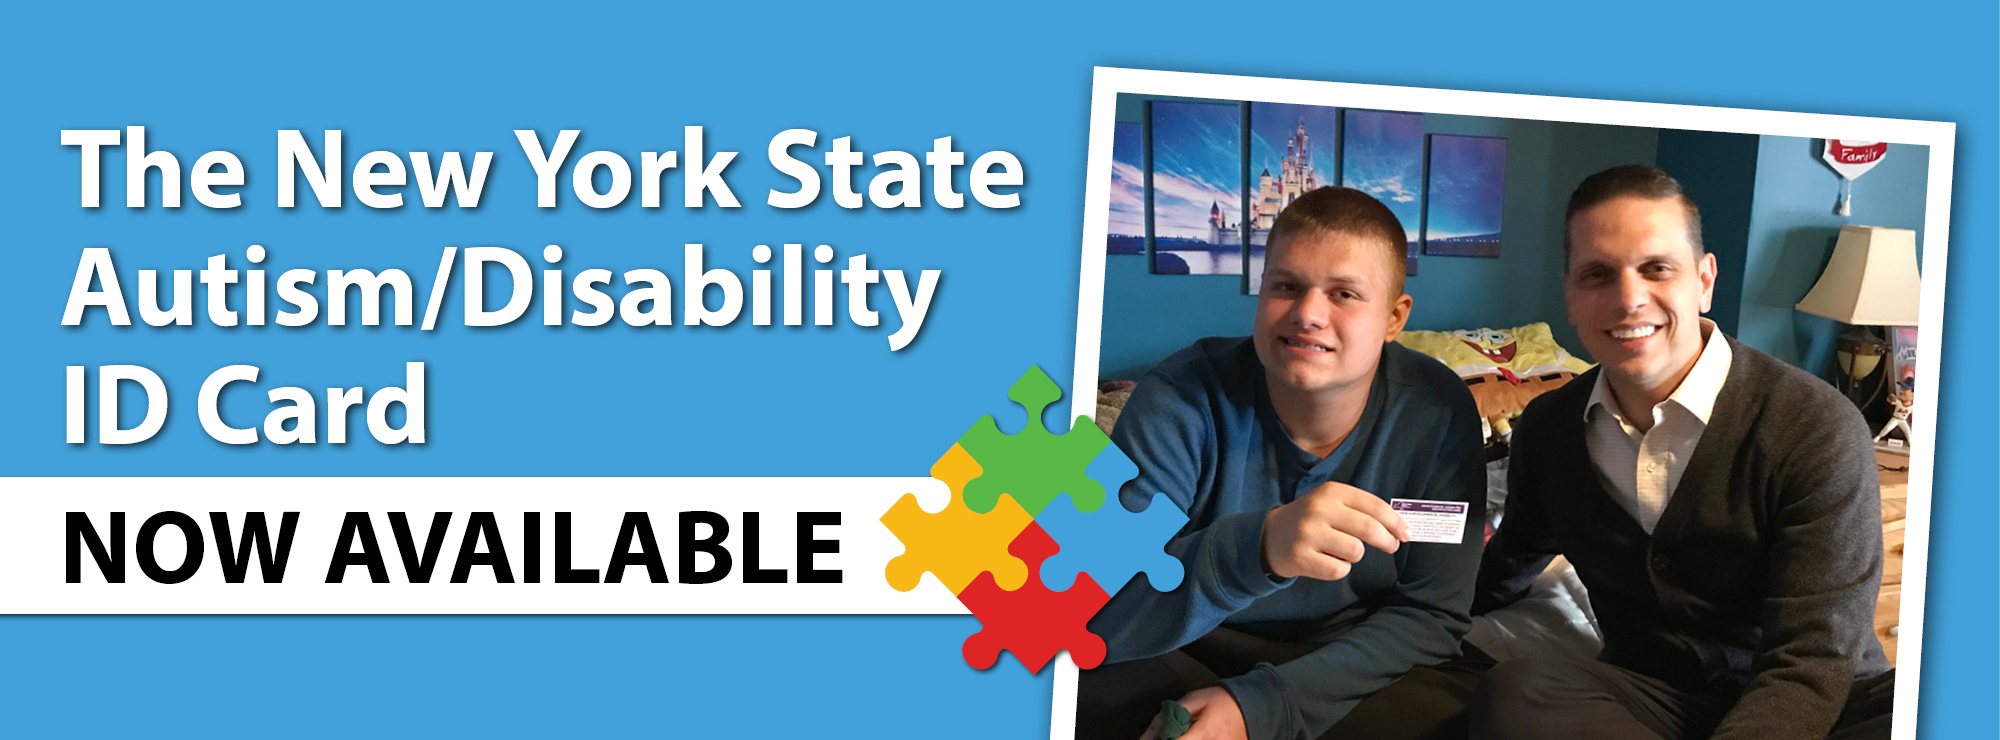 The New York State Autism/Disability ID Card